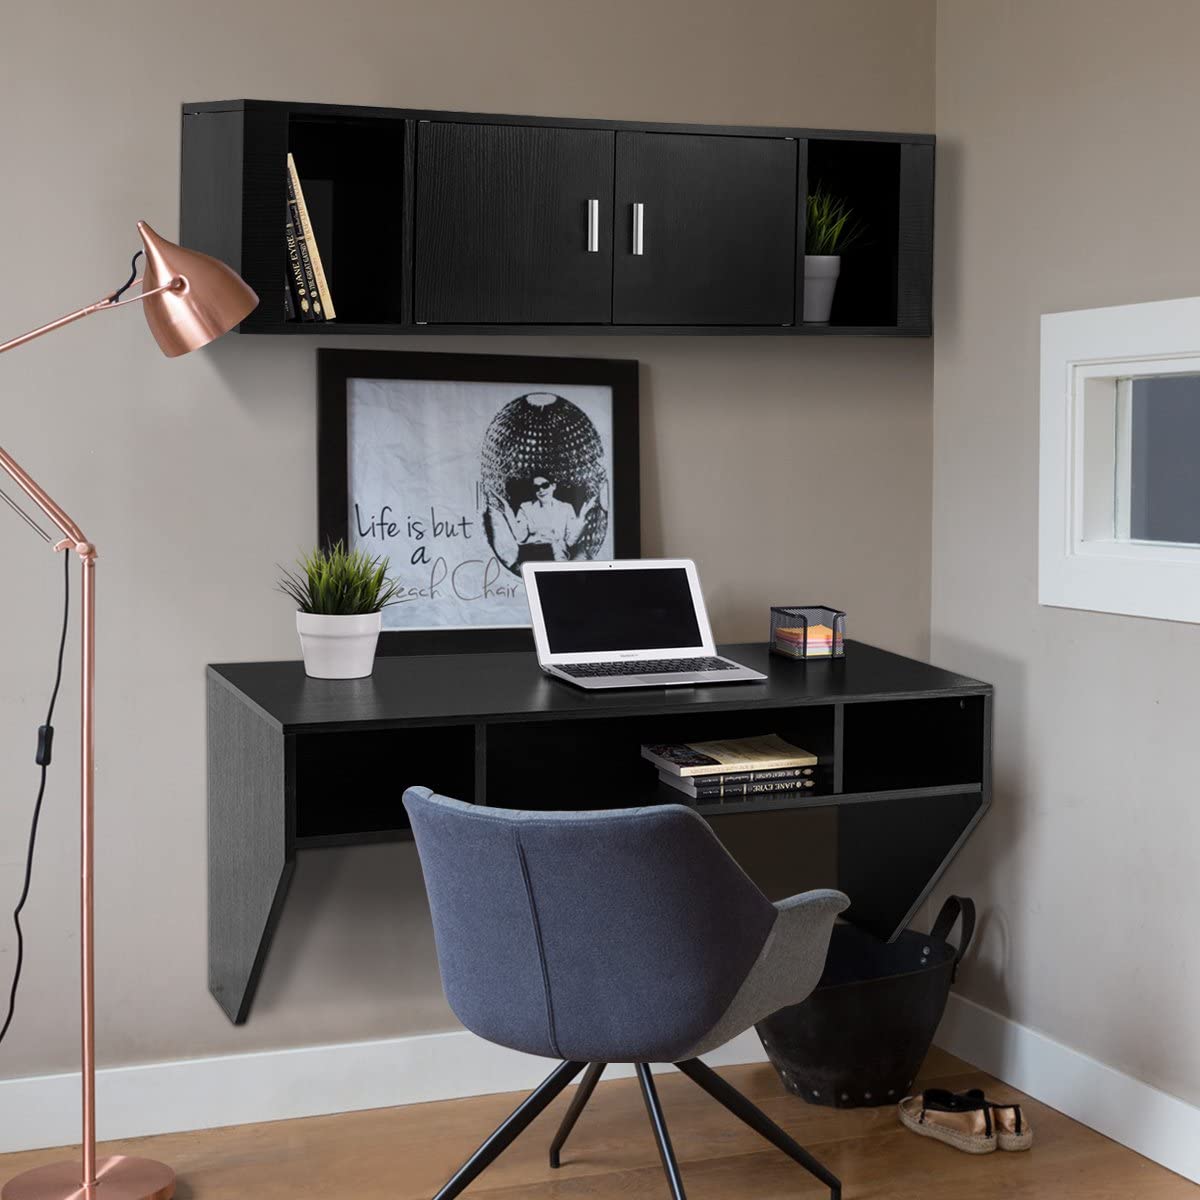 Wall Mounted Floating Computer Desk